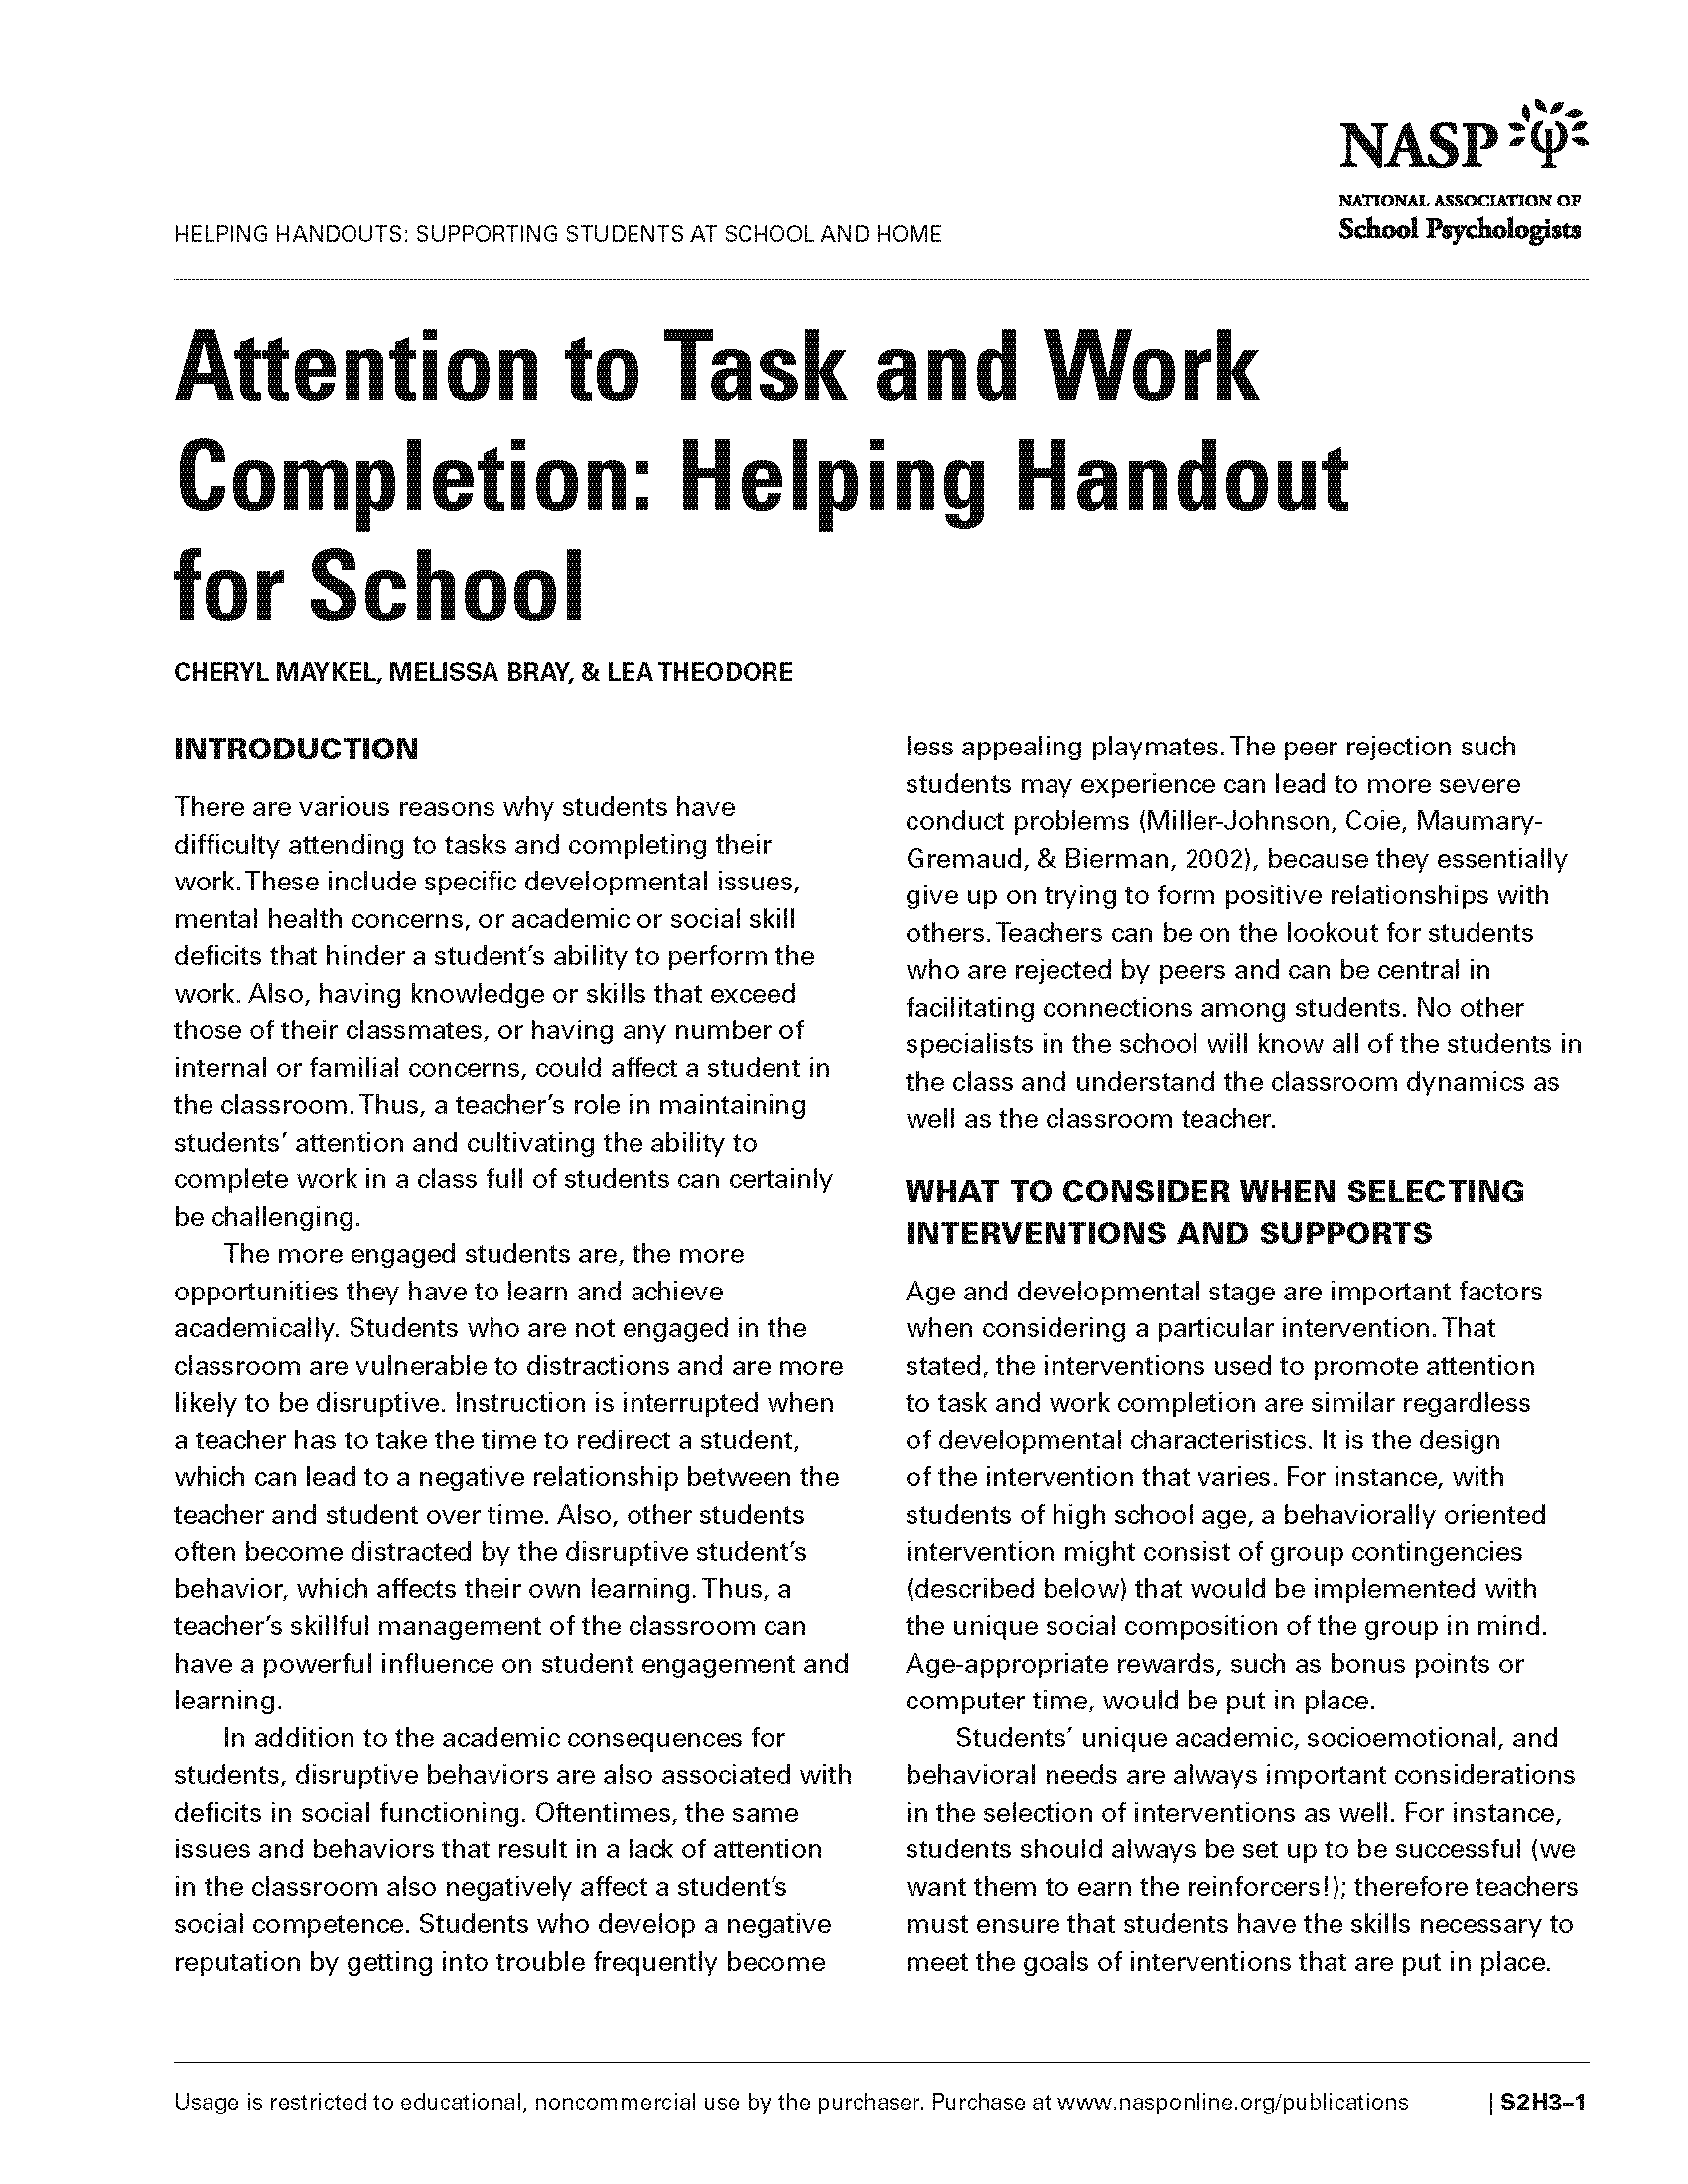 Attention to Task and Work Completion: Helping Handout for School